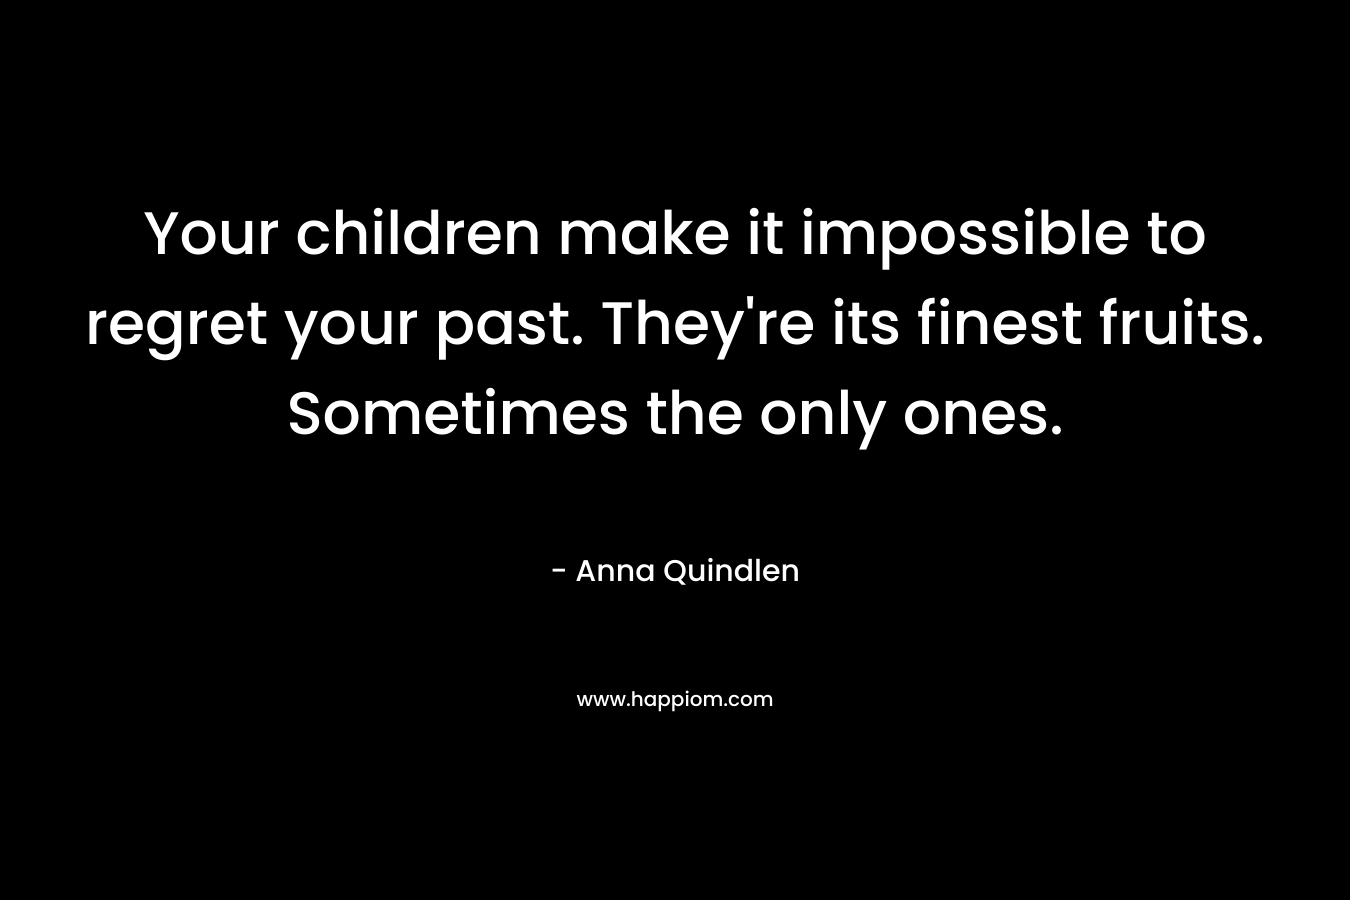 Your children make it impossible to regret your past. They're its finest fruits. Sometimes the only ones.